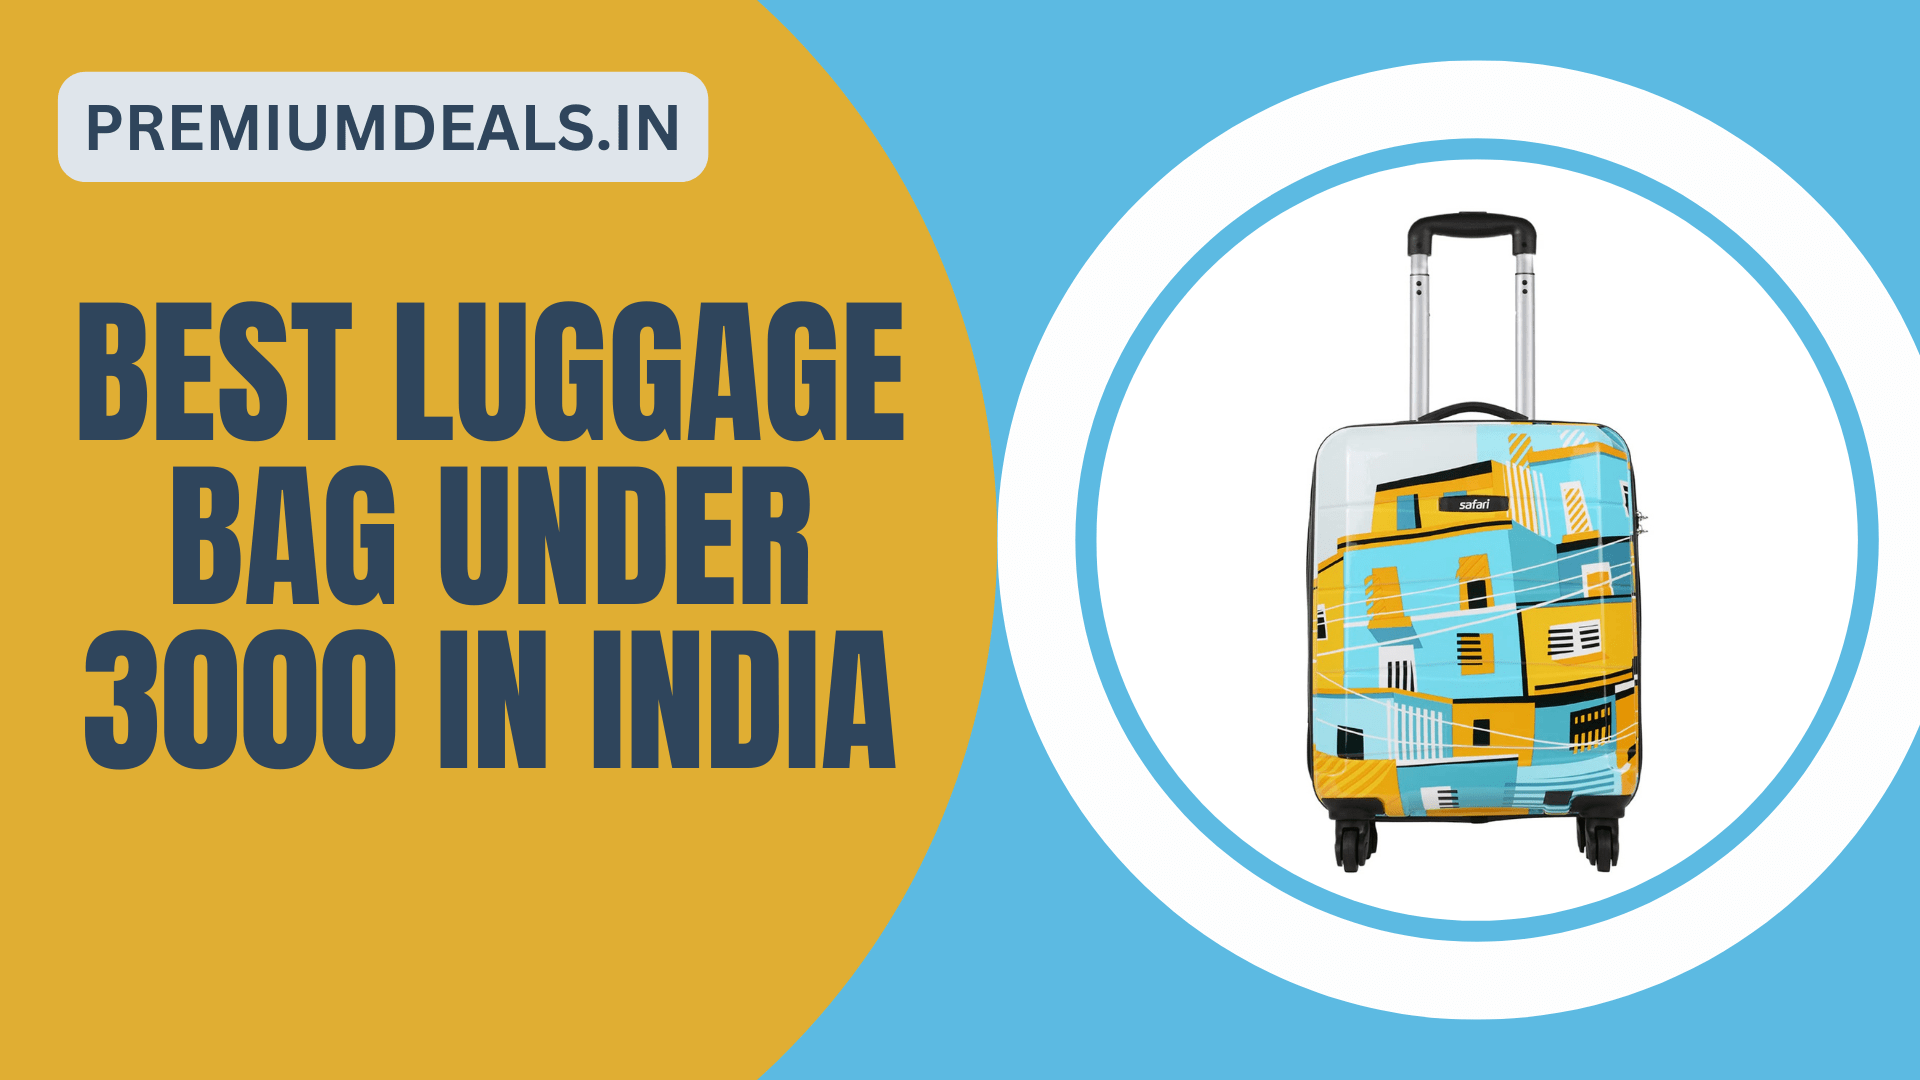 Best Luggage Bag Under 3000 in India